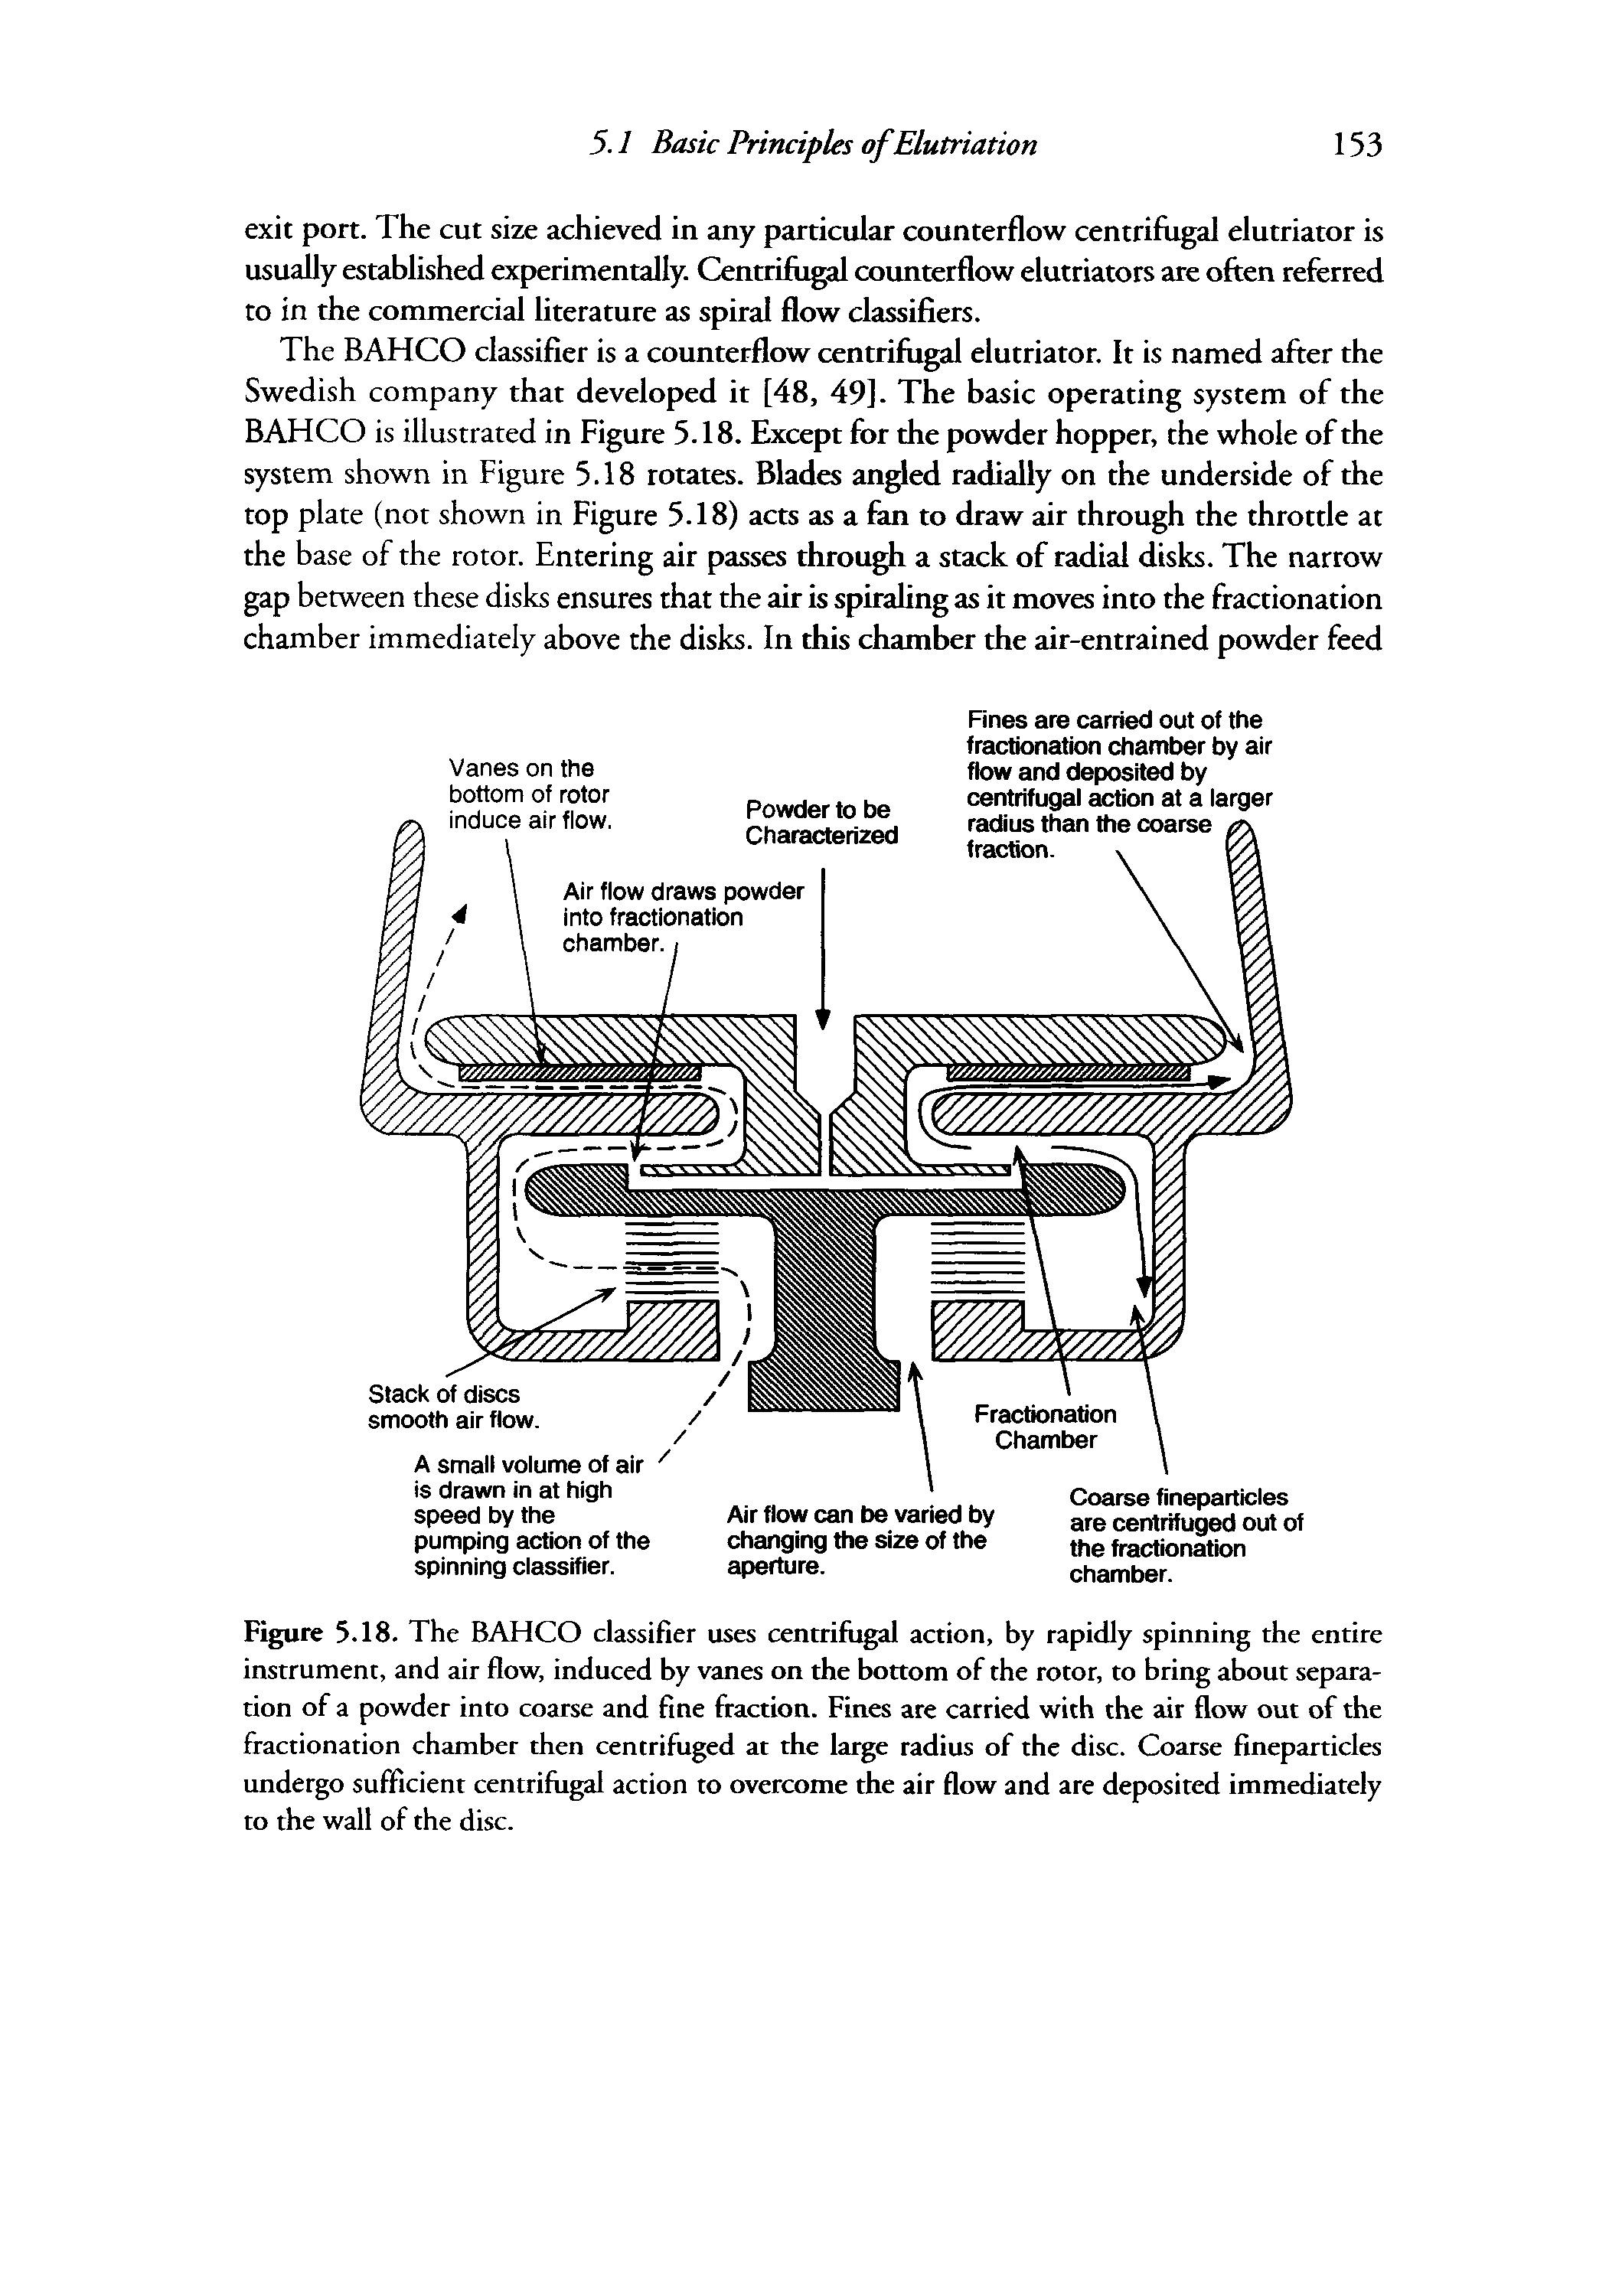 Figure 5.18. The BAHCO classifier uses centrifugal action, by rapidly spinning the entire instrument, and air flow, induced by vanes on the bottom of the rotor, to bring about separation of a powder into coarse and fine fraction. Fines are carried with the air flow out of the fractionation chamber then centrifuged at the large radius of the disc. Coarse fineparticles undergo sufficient centrifugal action to overcome the air flow and are deposited immediately to the wall of the disc.